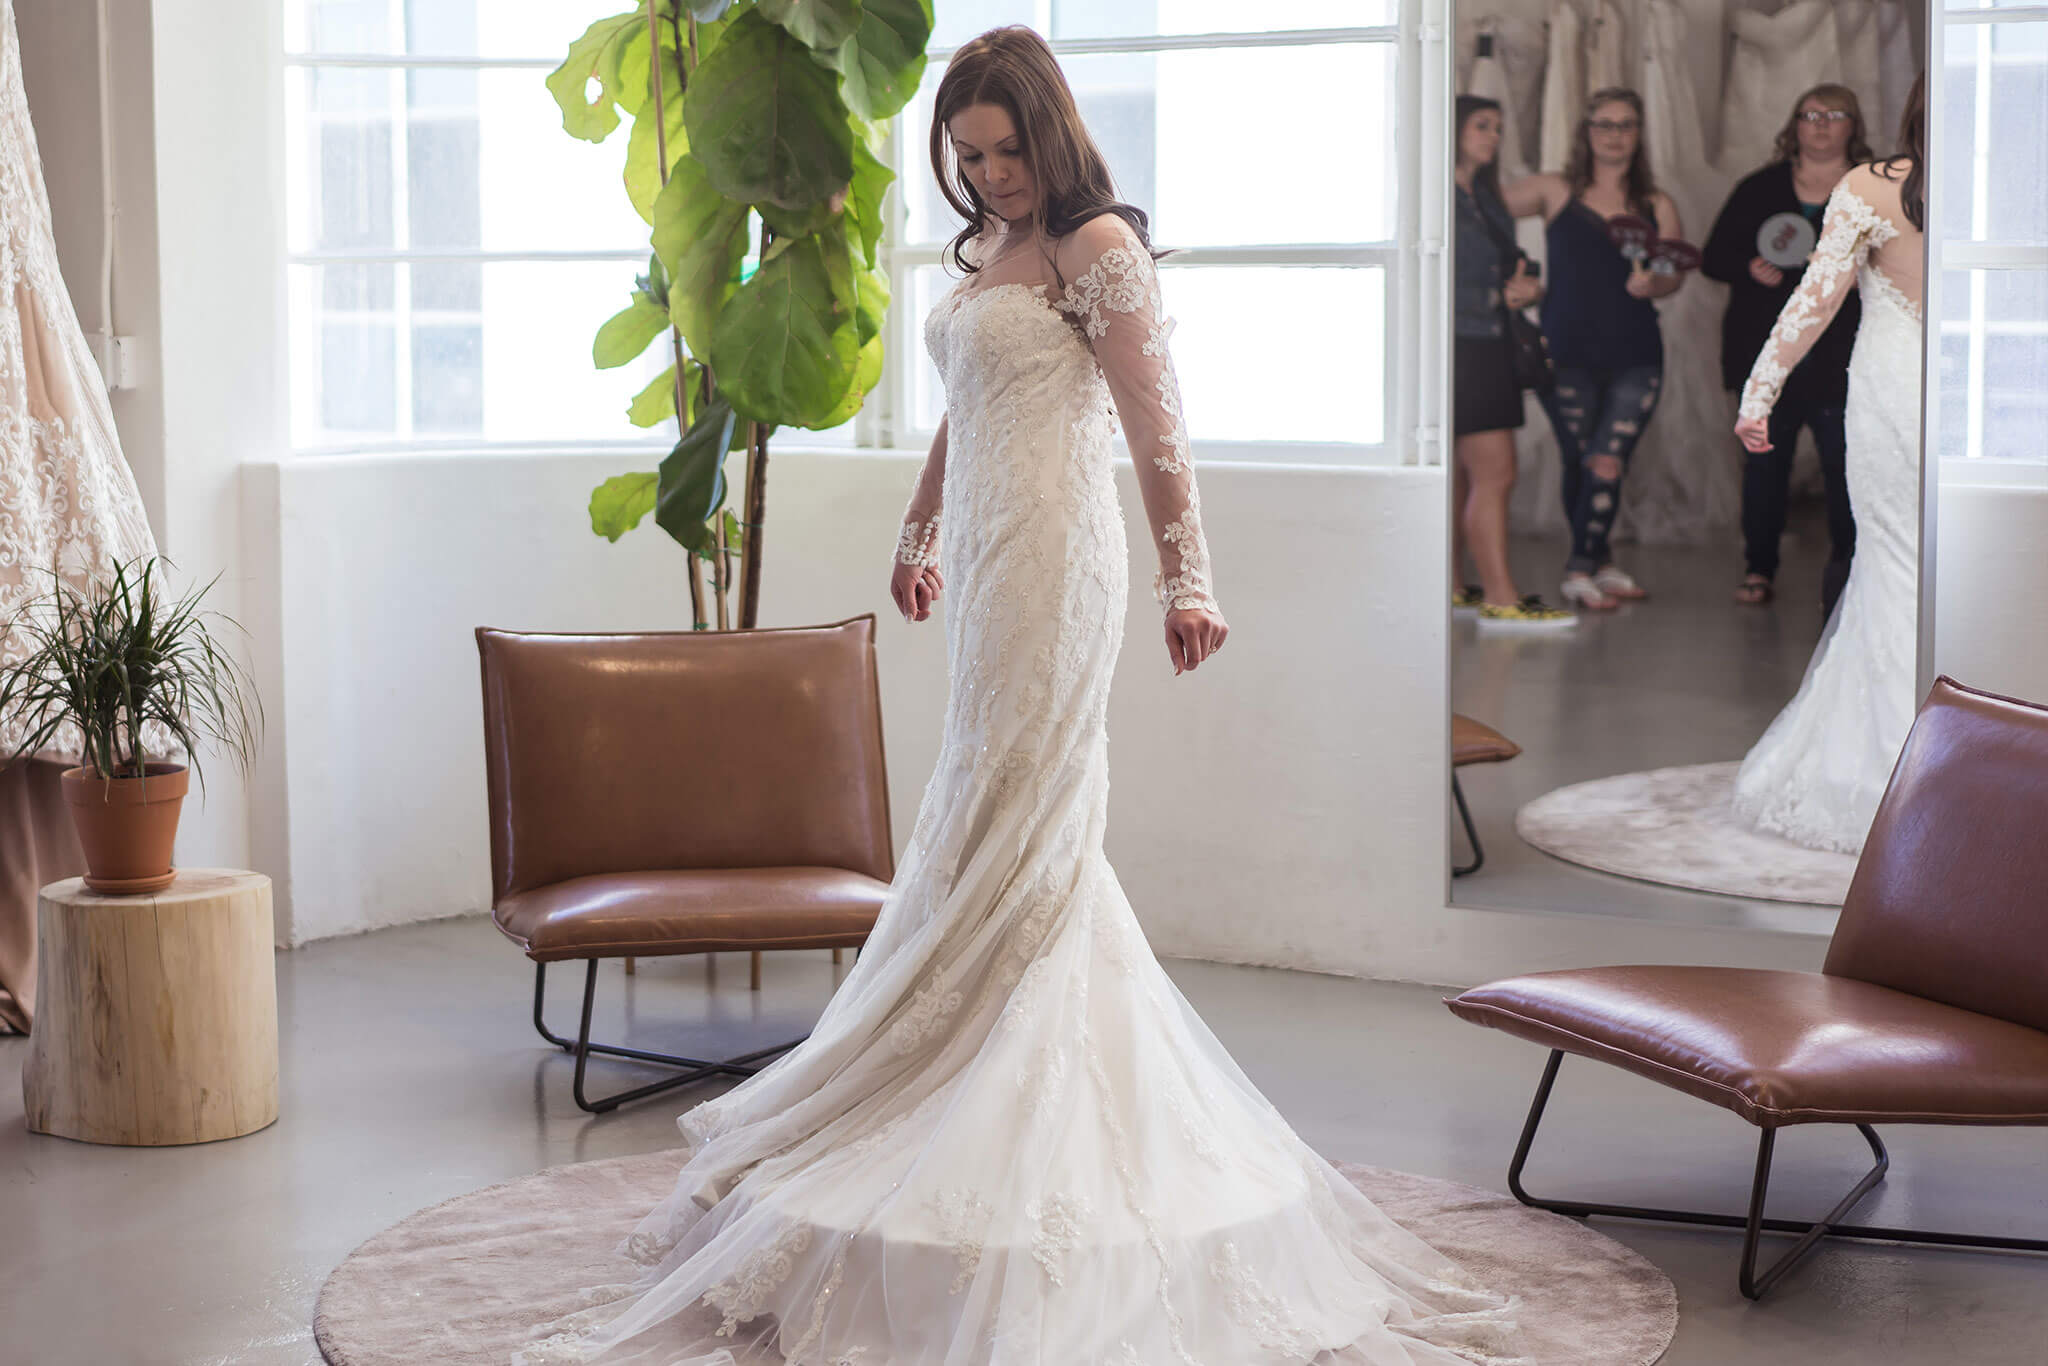 6 Wedding Dress Sleeve Styles All Brides Need to Know